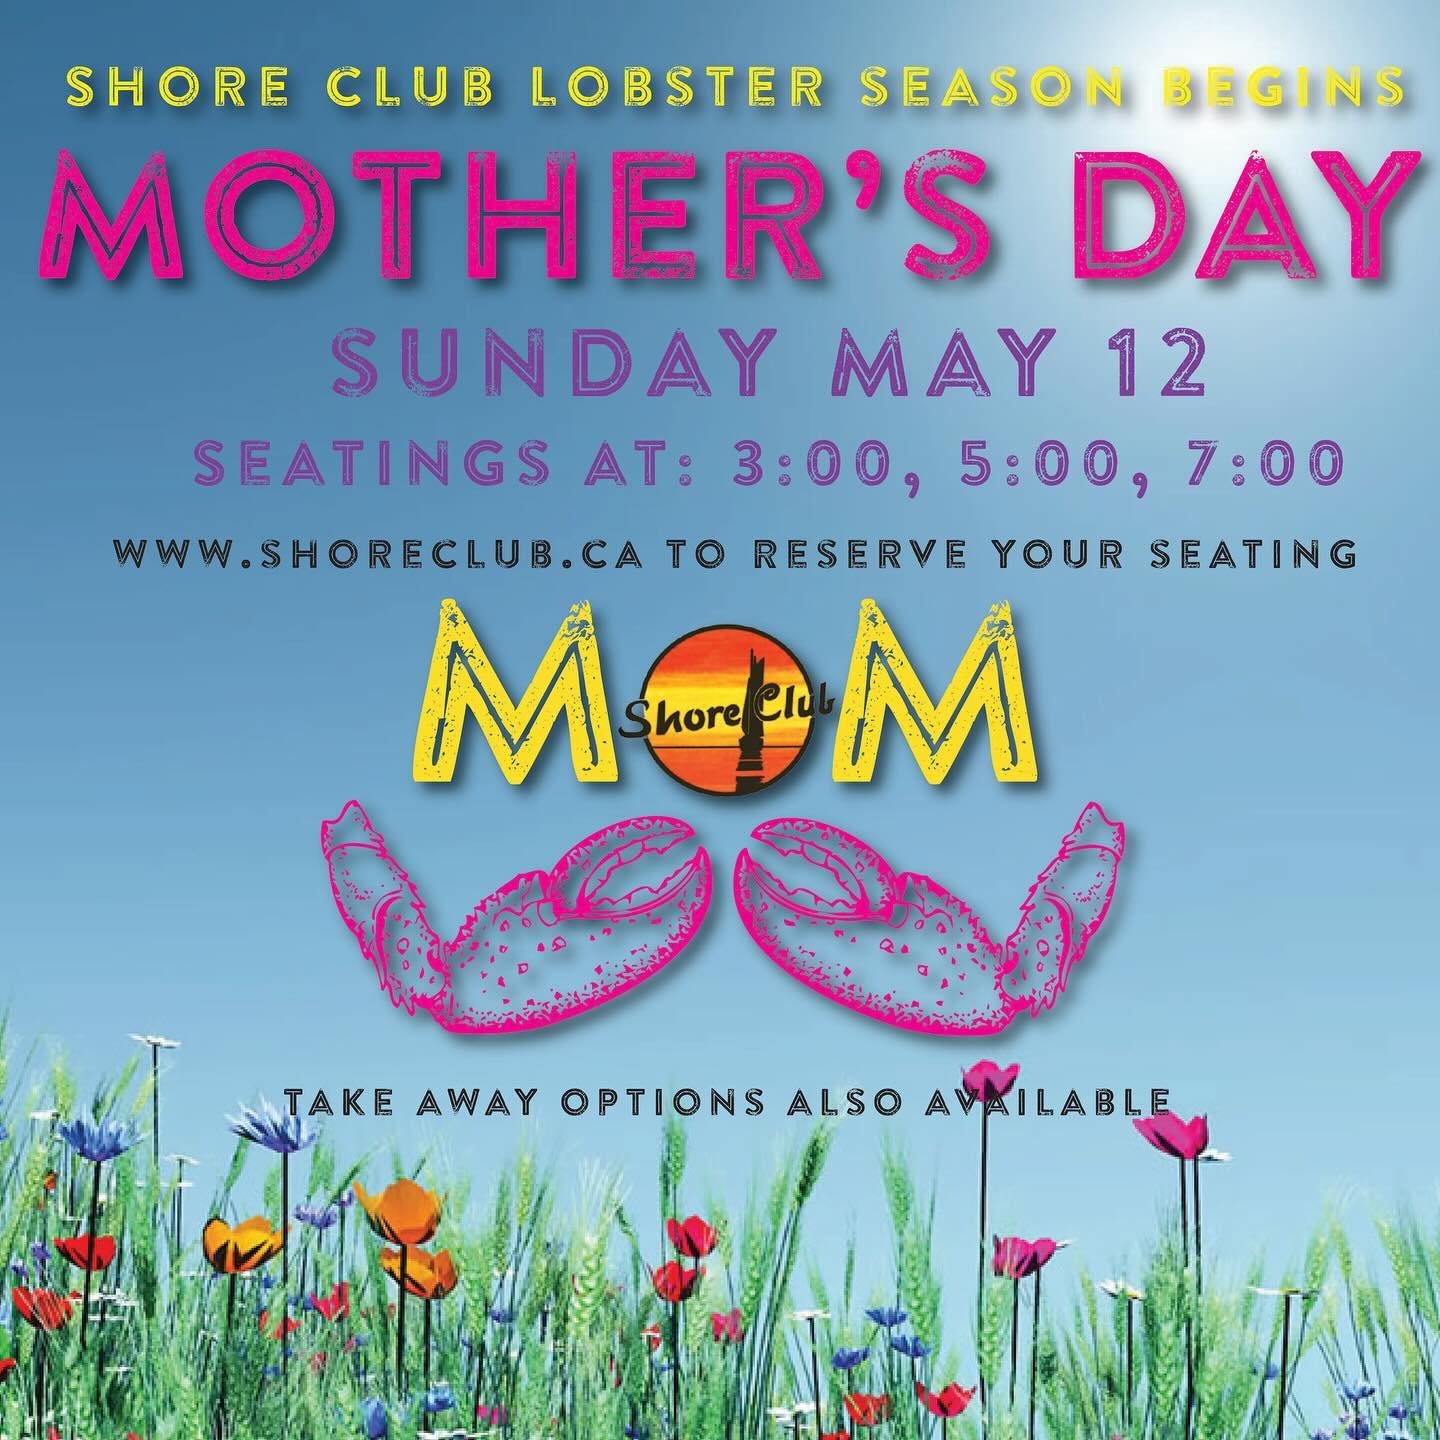 First Boil of our 88th Lobster Season is this Sunday on Mother&rsquo;s Day, May 12th! Currently 5:00 seating is sold out. Still some room for the 3:00 and 7:00. Reservations can be made on our website: www.shoreclub.ca
.
#shoreclub #lobstersupper #hu